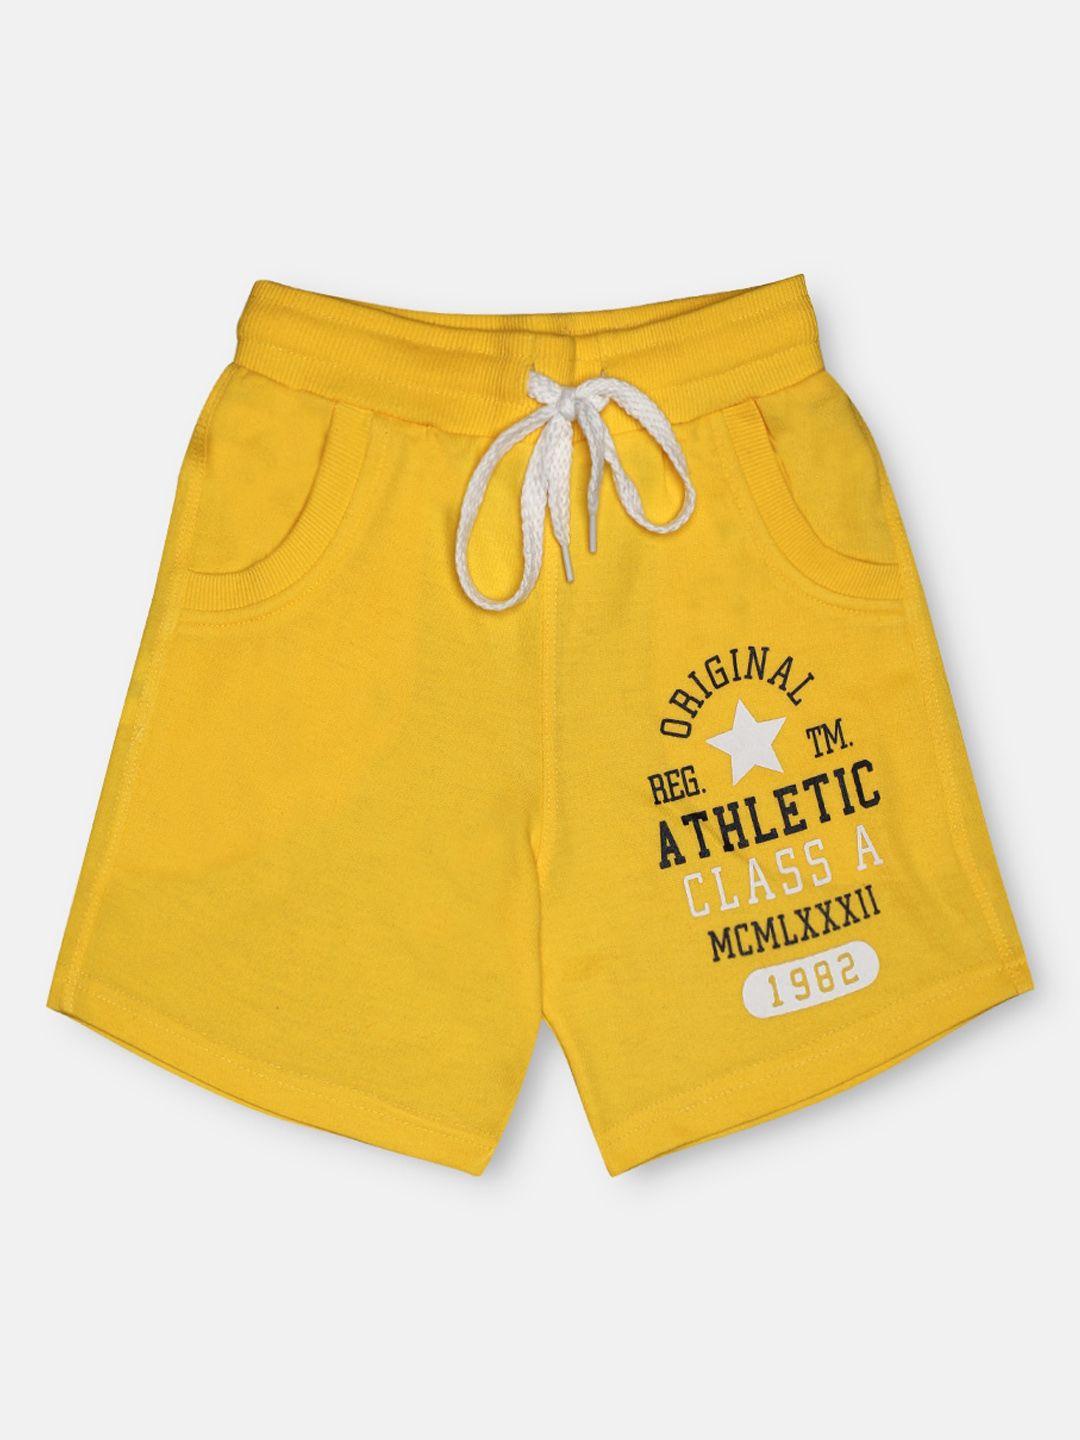 chimprala boys yellow printed outdoor antimicrobial technology cotton shorts